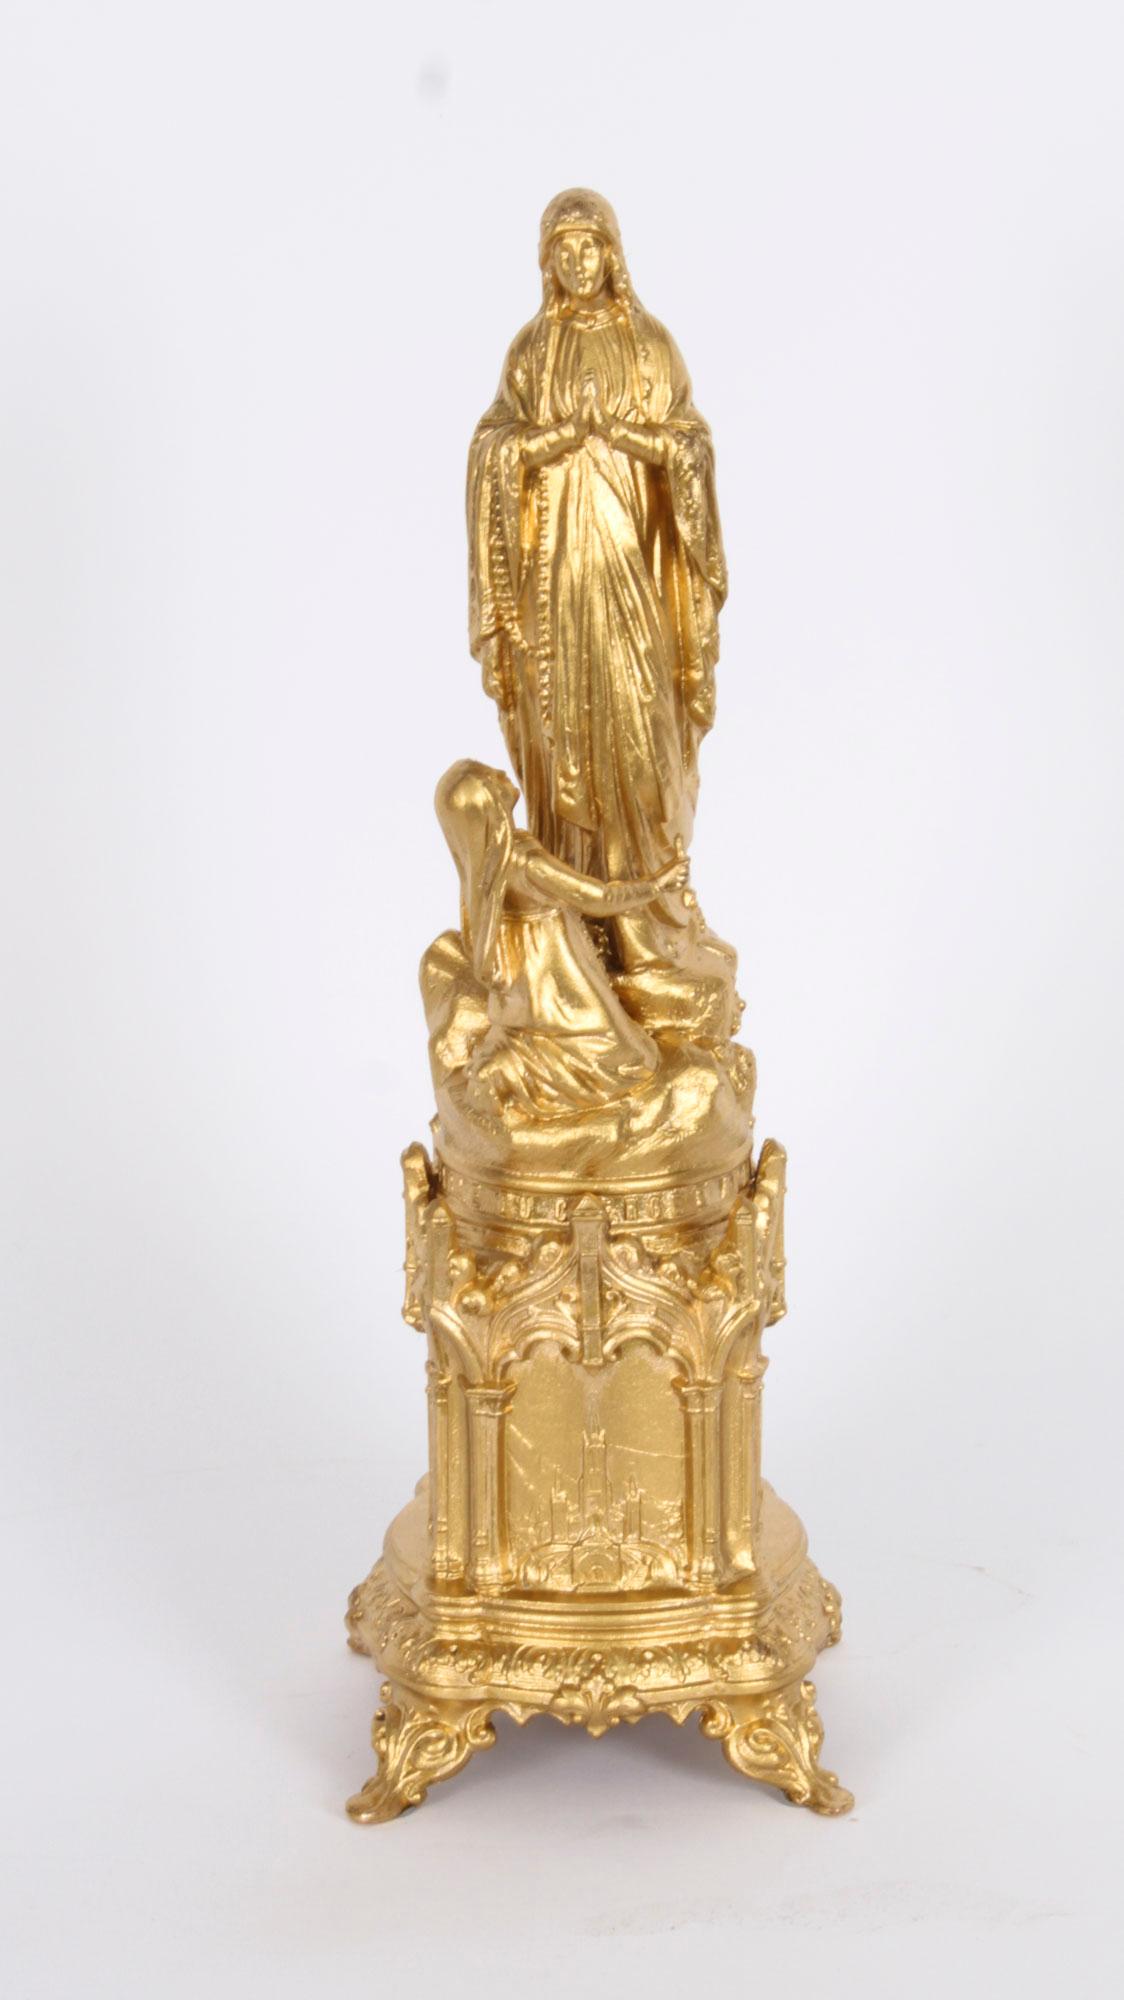 An antique French ormolu souvenir of Lourdes, showing St Bernadette before the Virgin Mary as the 